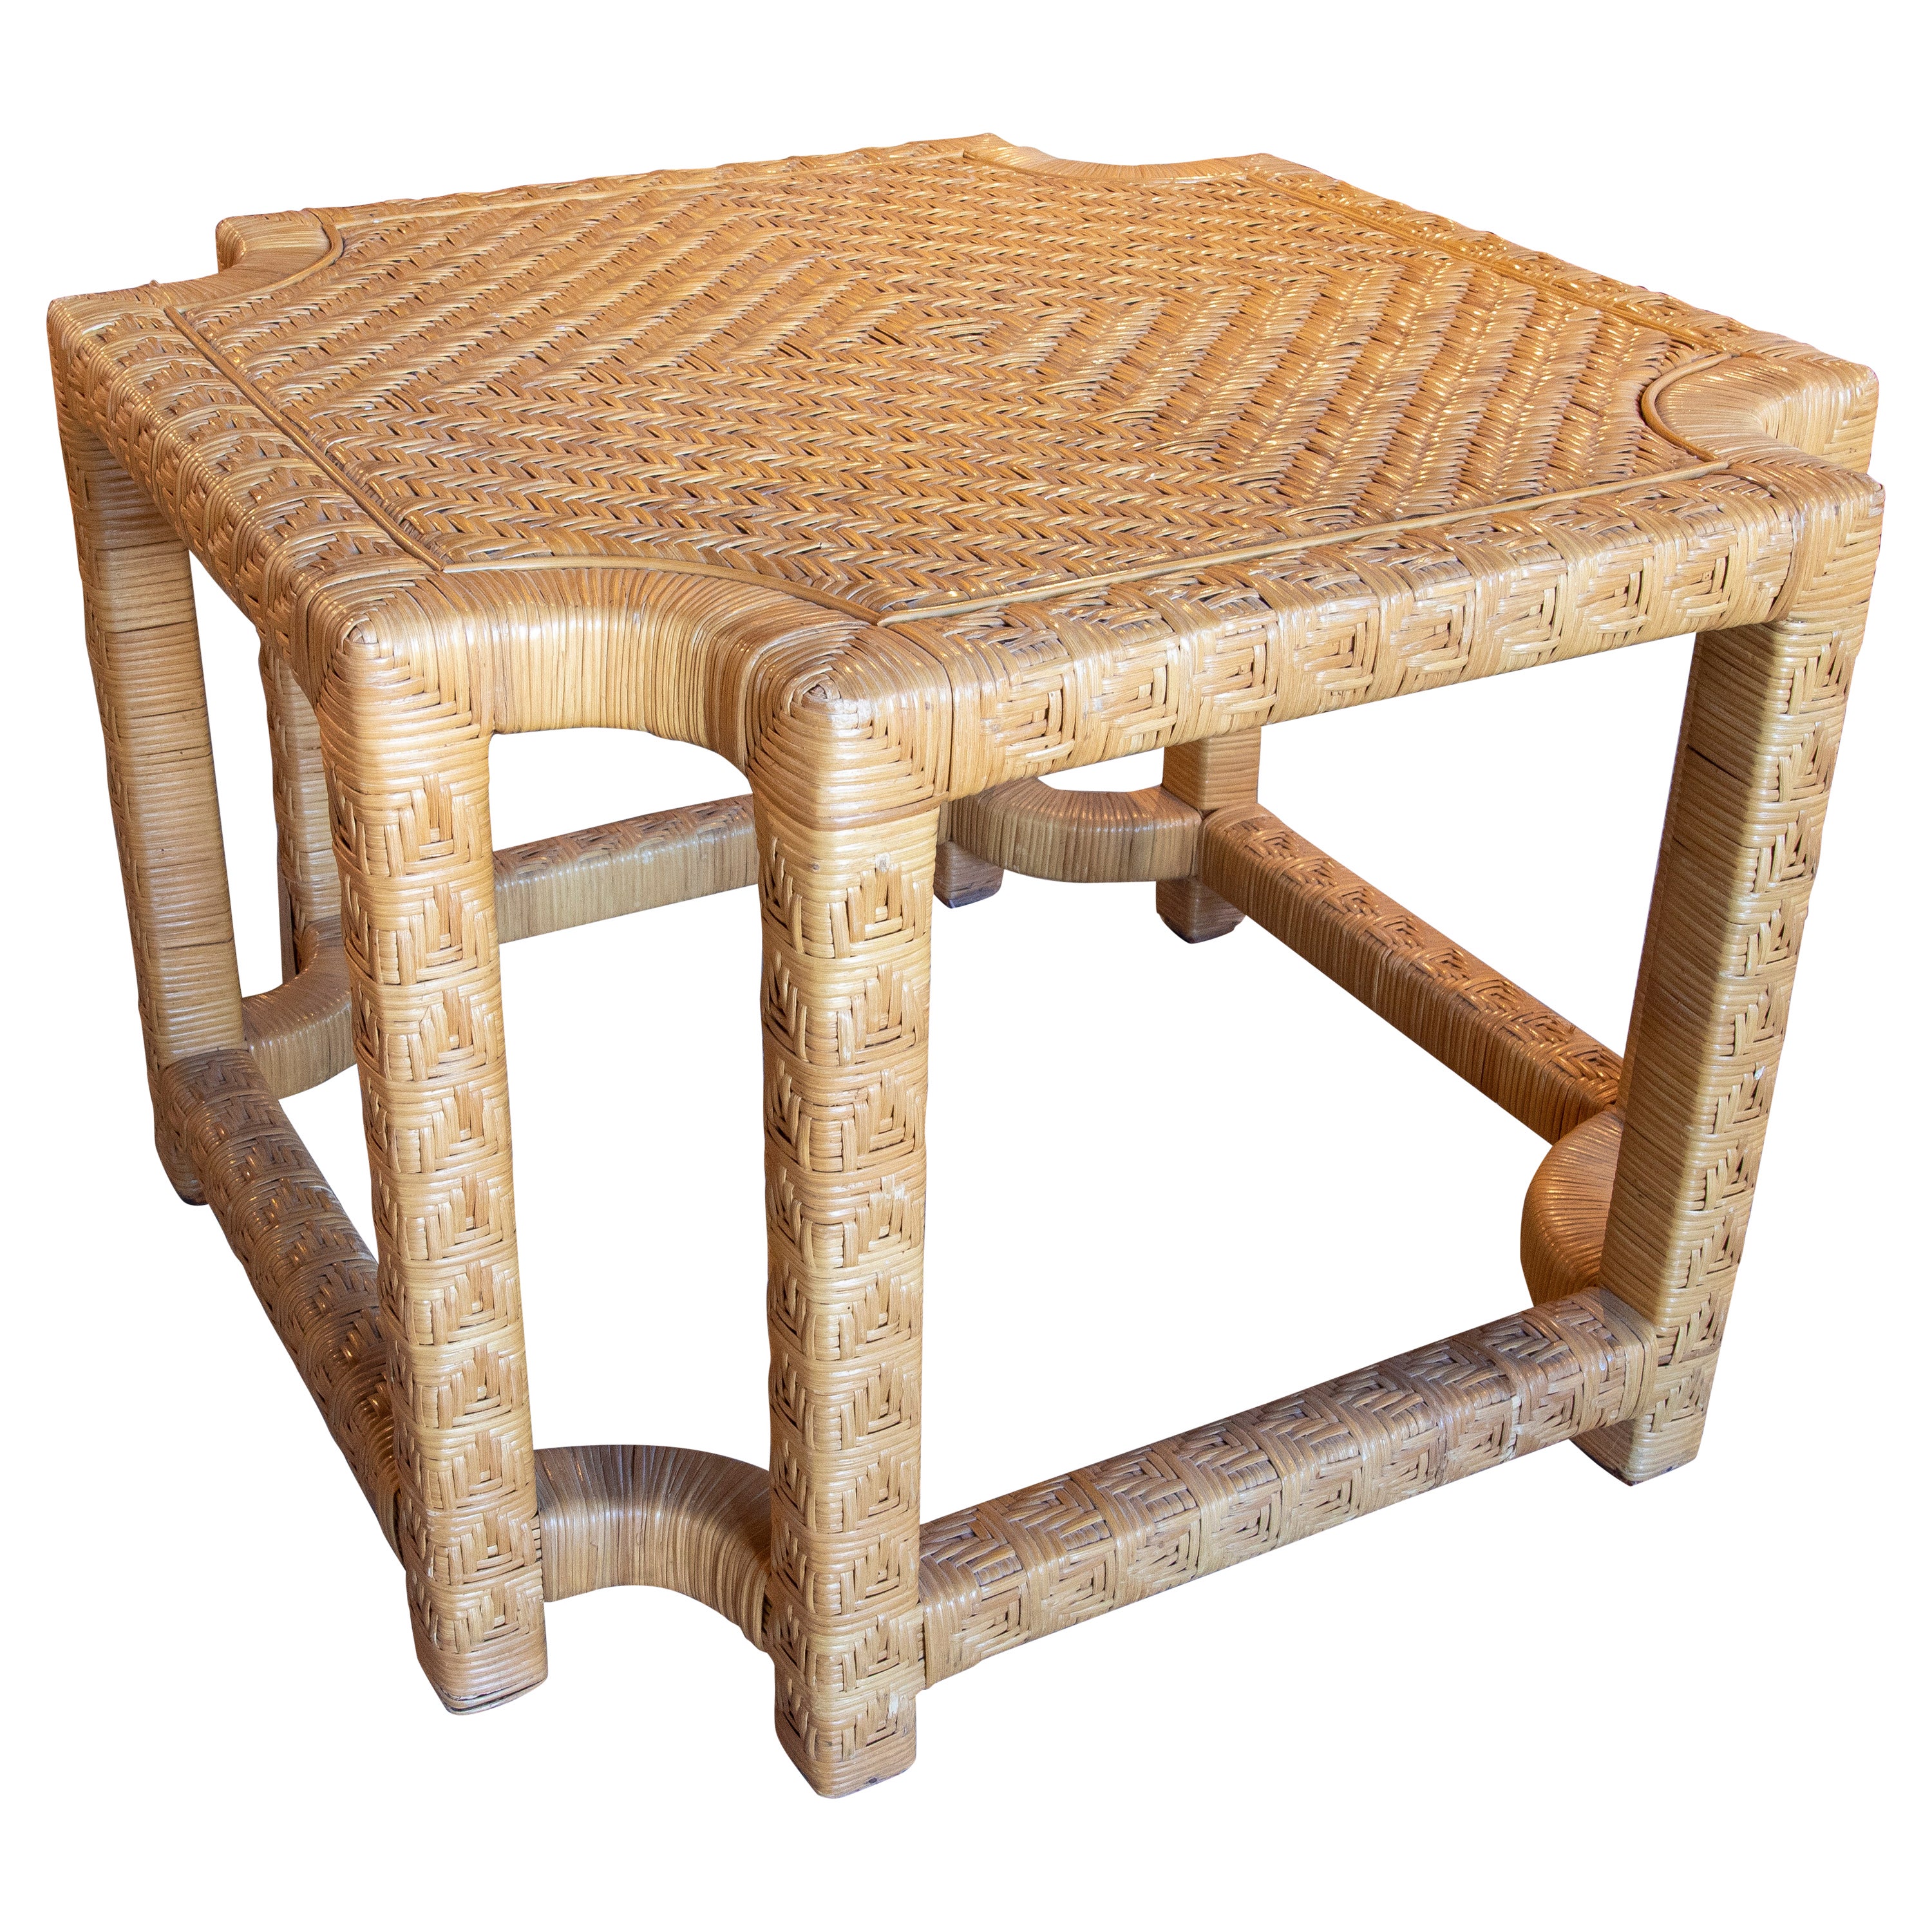 Spanish Side Table with Wooden Frame Covered with Hand-Sewn Wicker